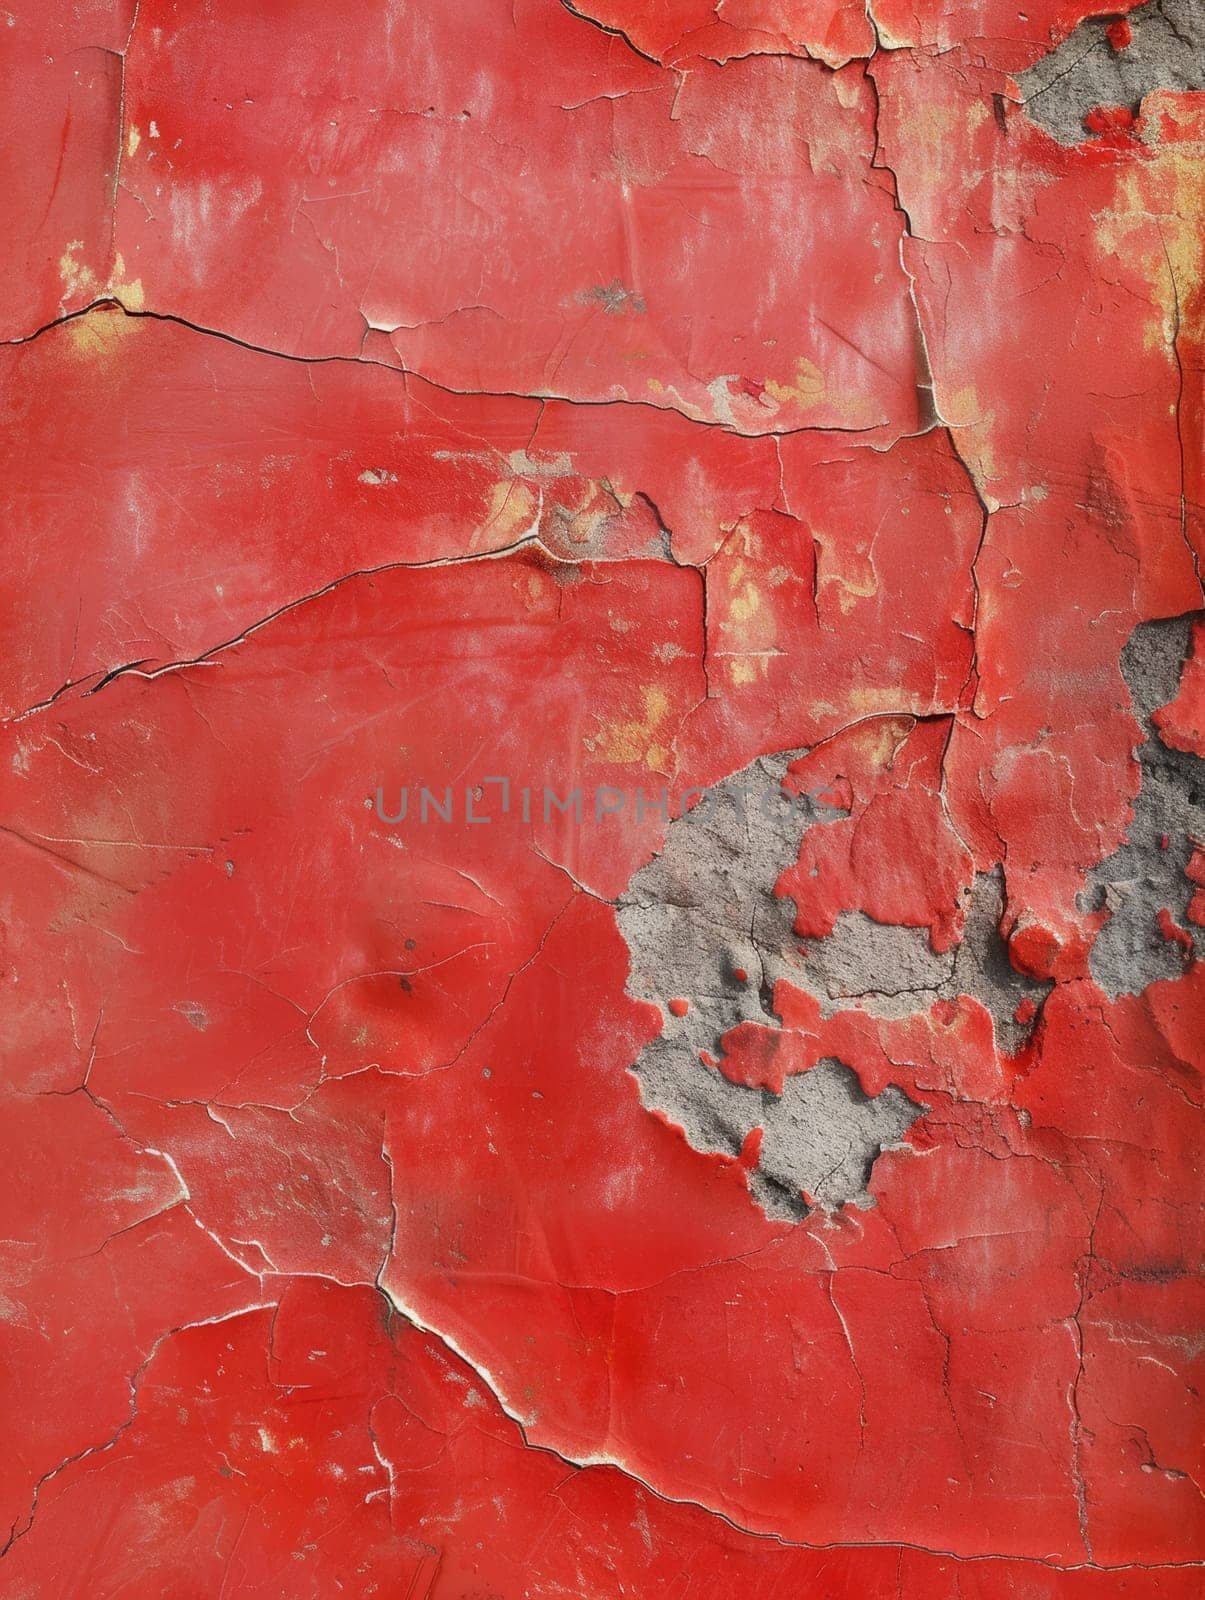 Distressed red painted surface showing cracks and wear, evoking a sense of decay and texture